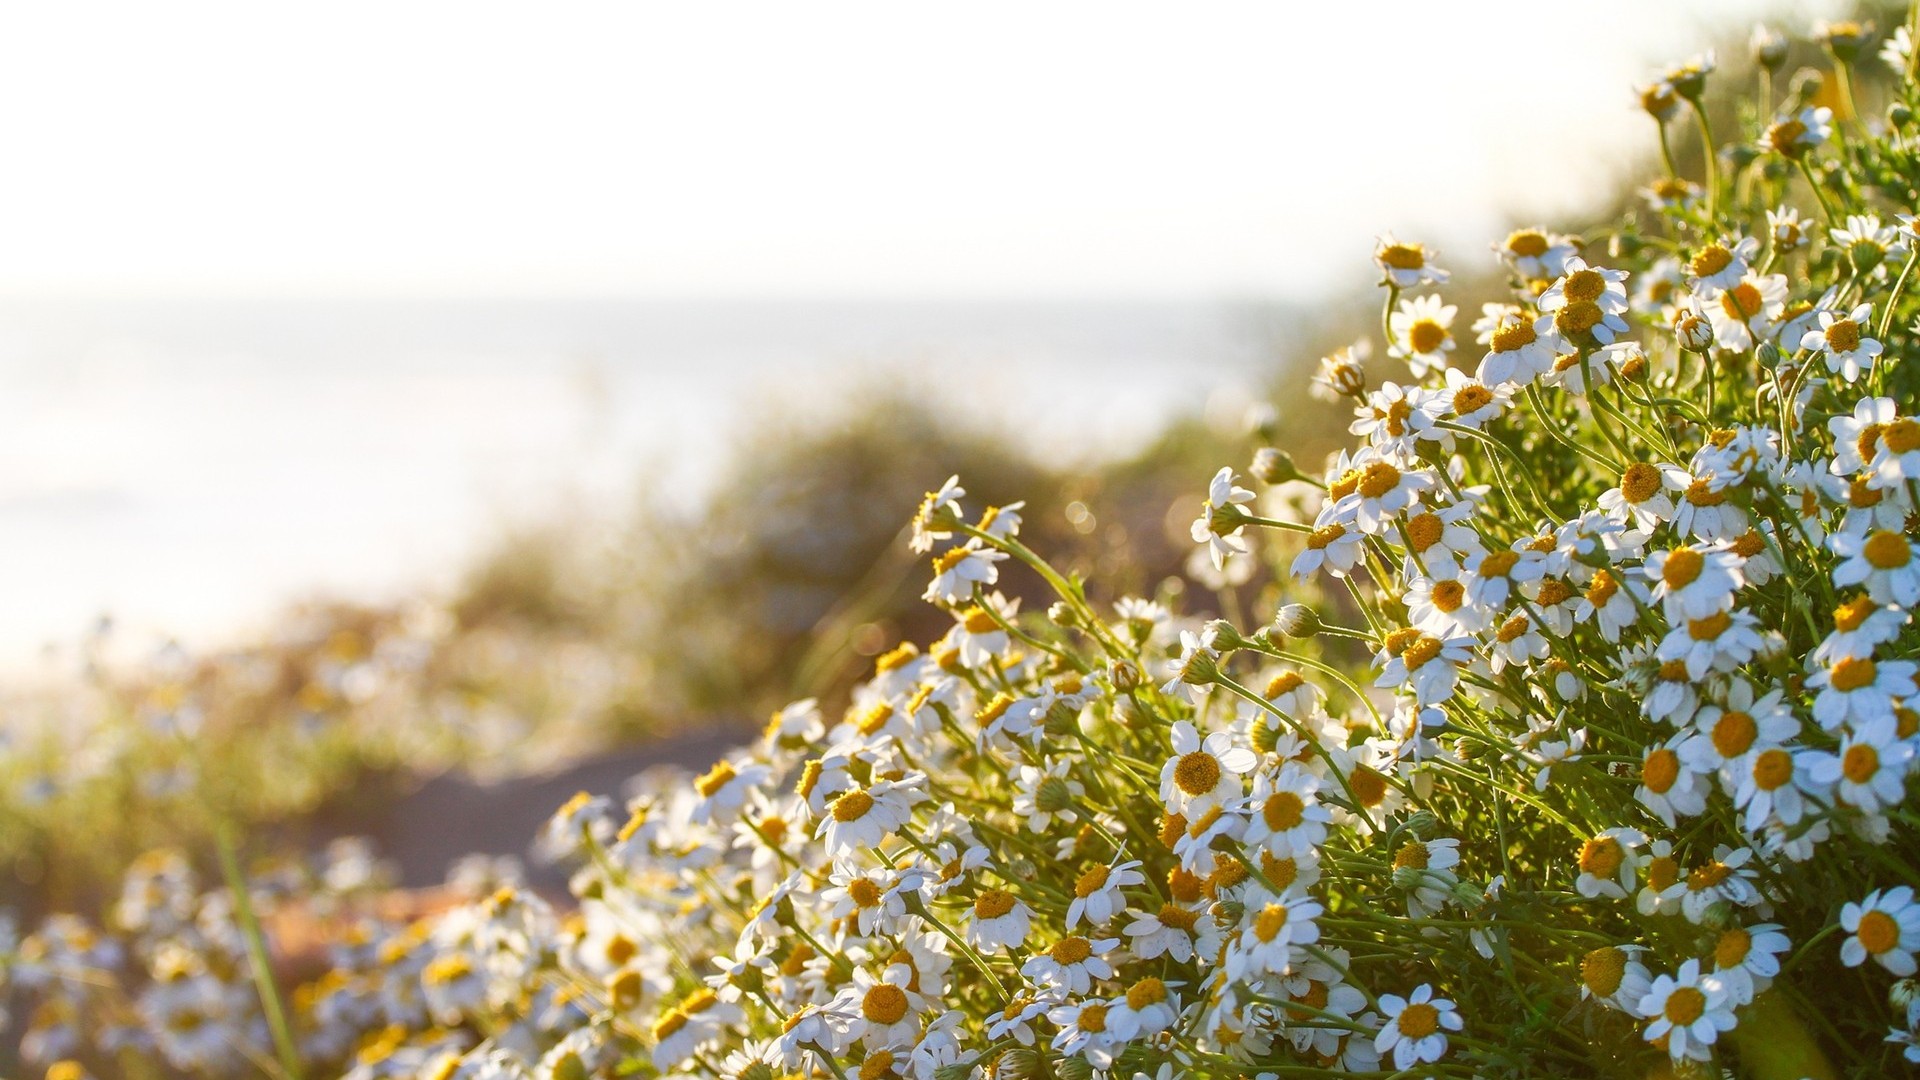 SuperHD.pics: Daisies depth of field flowers nature white flowers ...